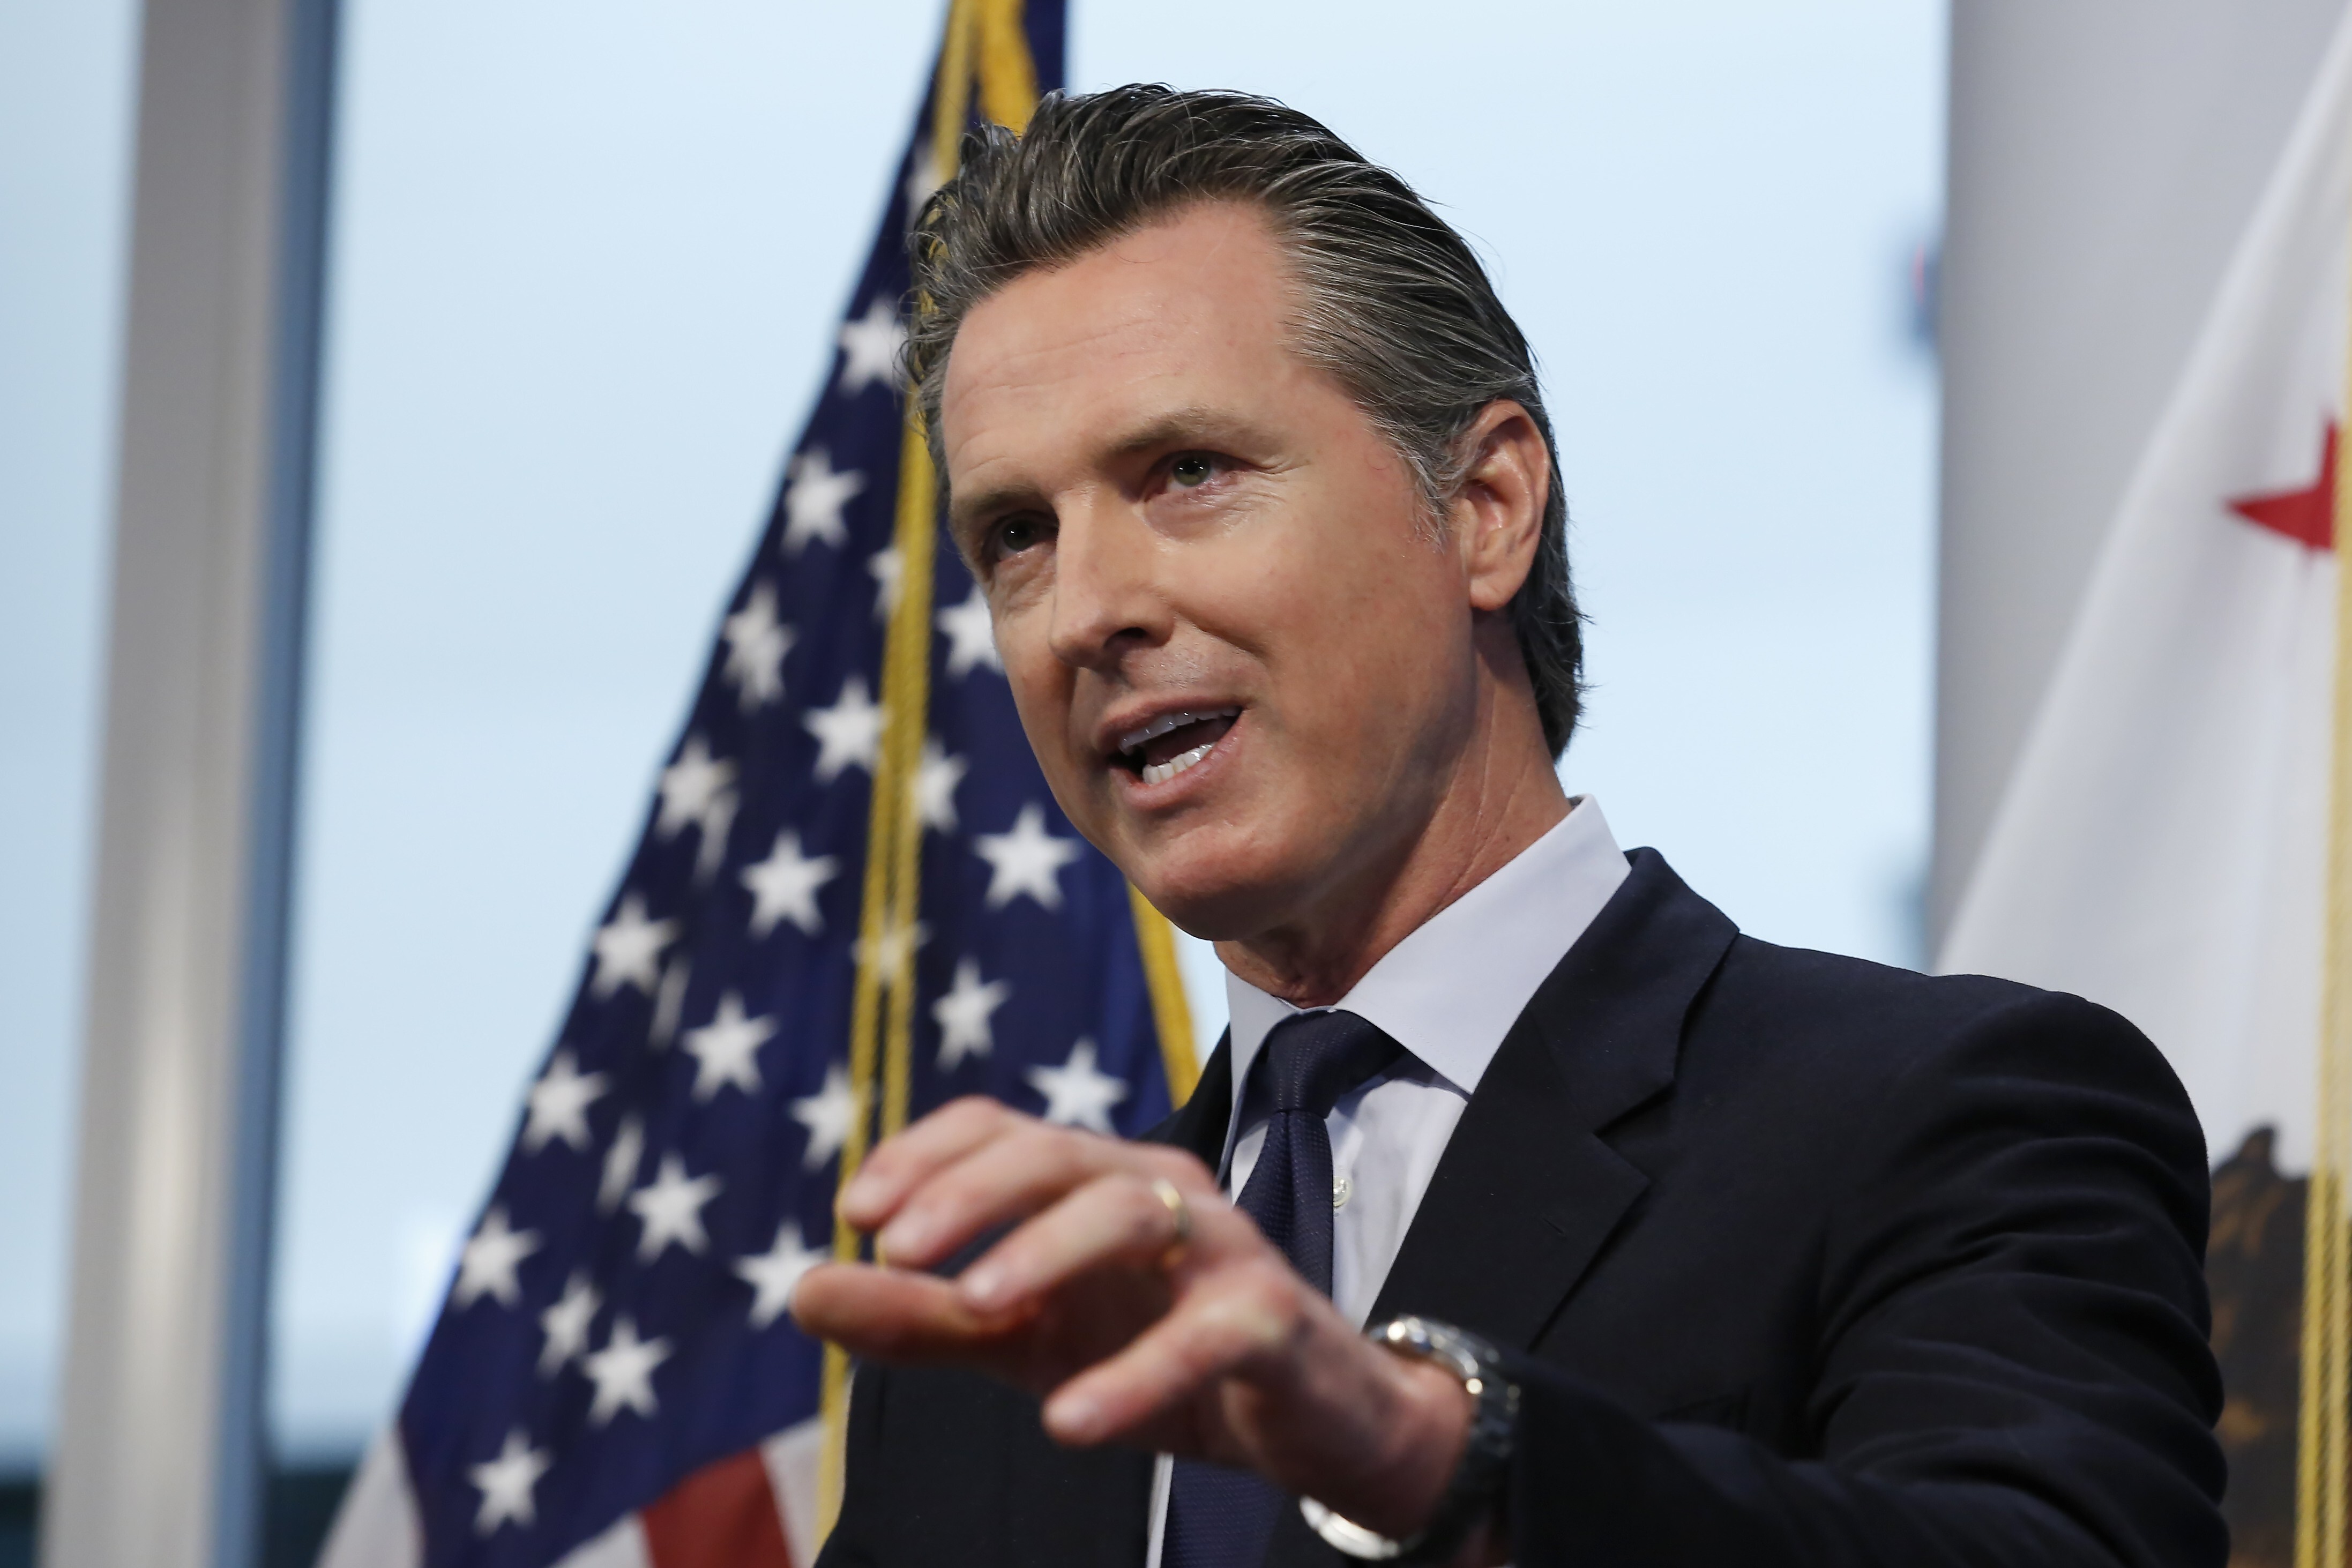 Applications poured in after California Governor Gavin Newsom announced the state would increase the volume of health care workers to prepare for an anticipated surge in Covid-19 cases. Photo: AP